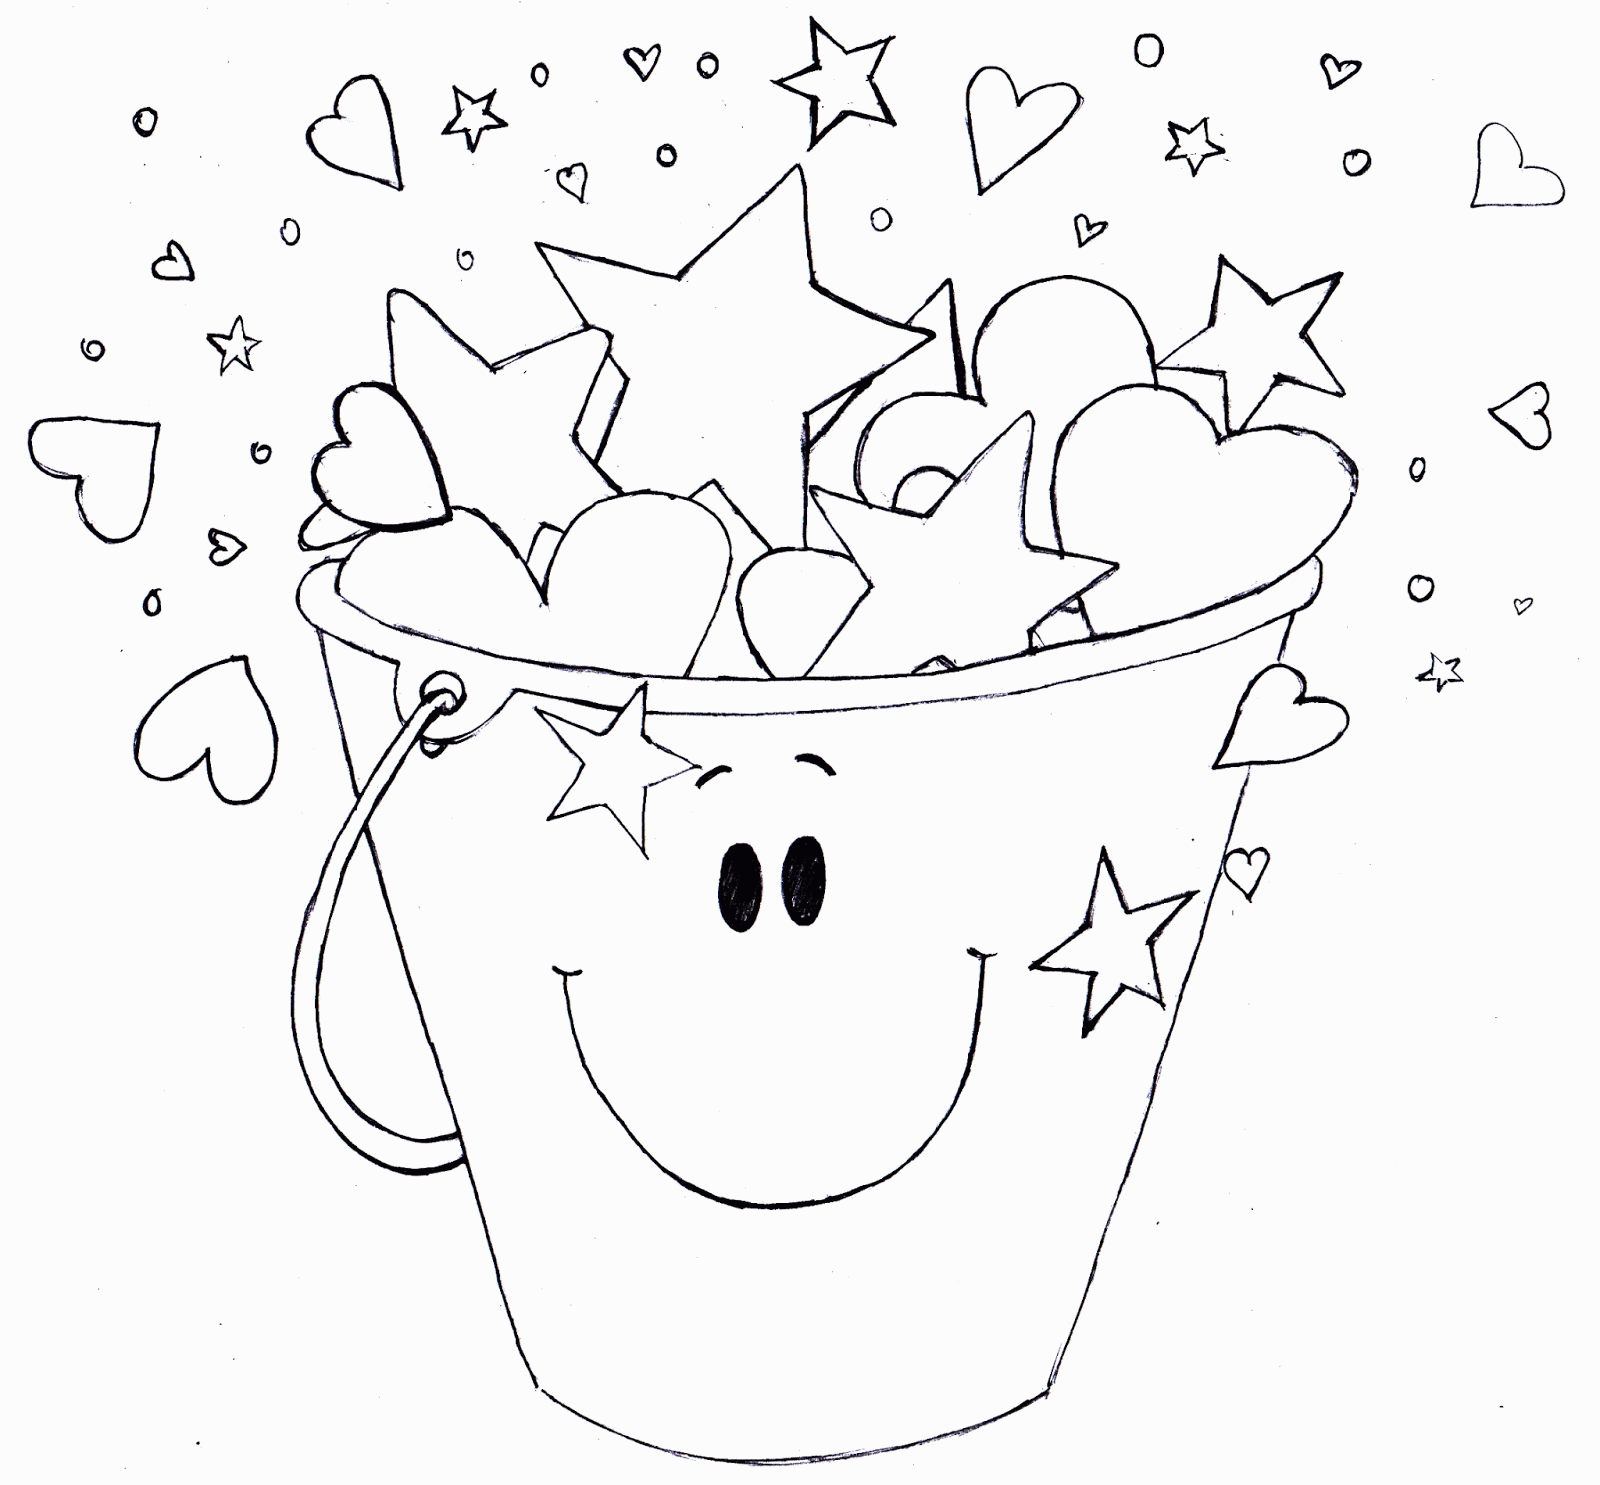 free-bucket-fillers-coloring-page-download-free-bucket-fillers